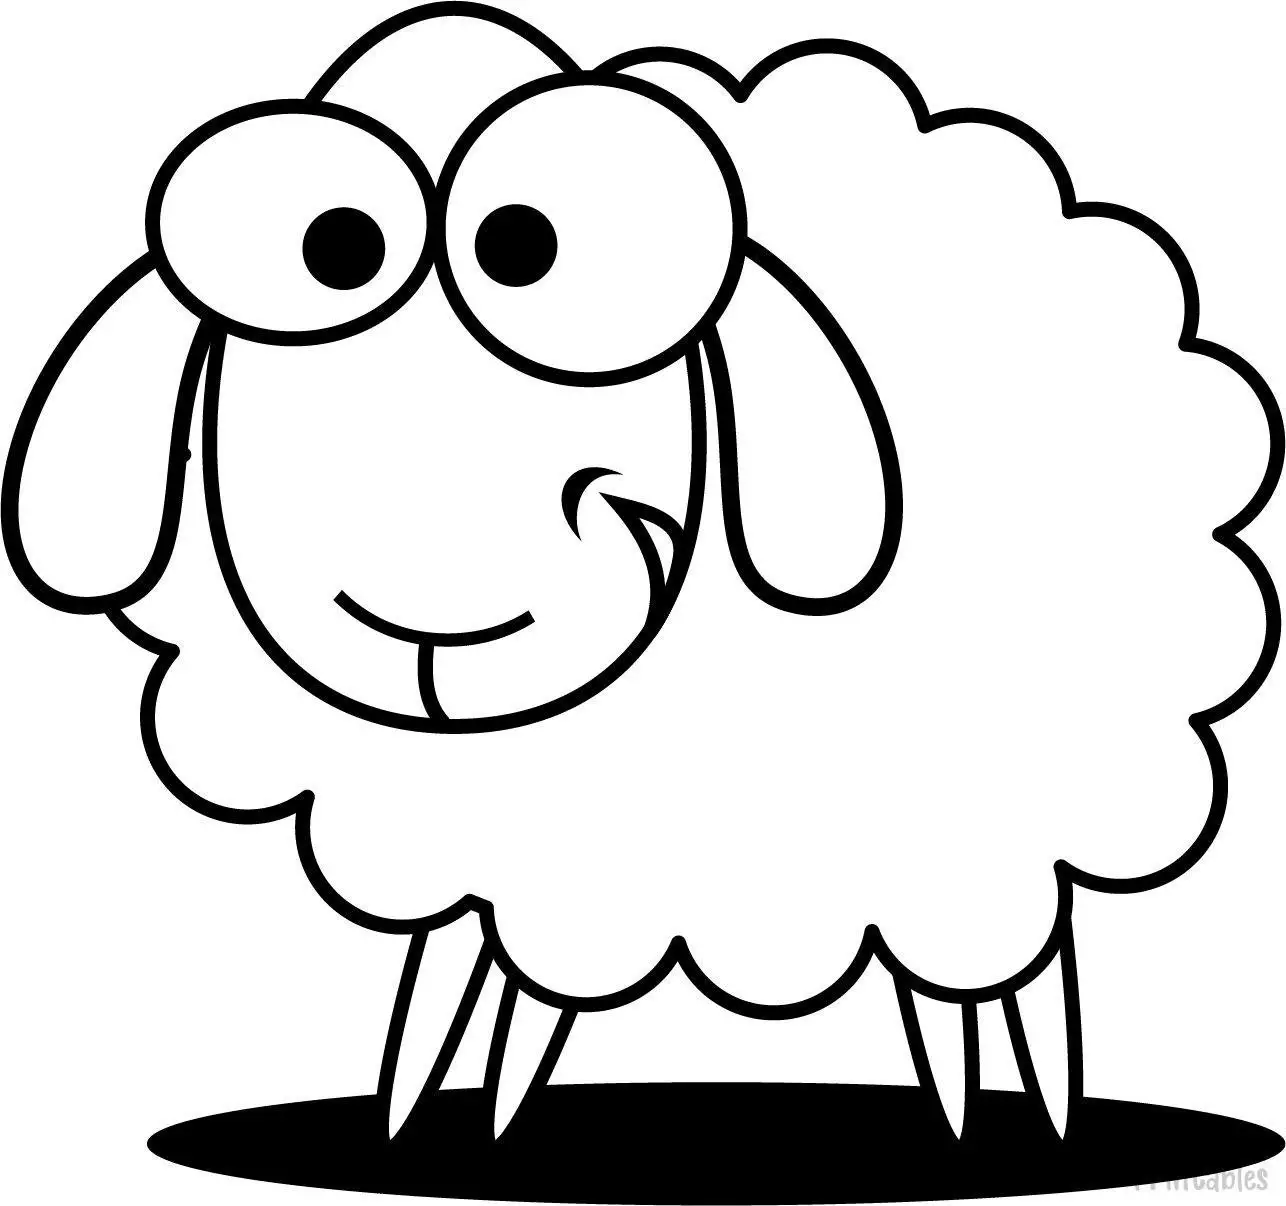 SIMPLE-EASY-line-drawings-CUTE-SHEEP-LAMB-coloring-page-for-kids